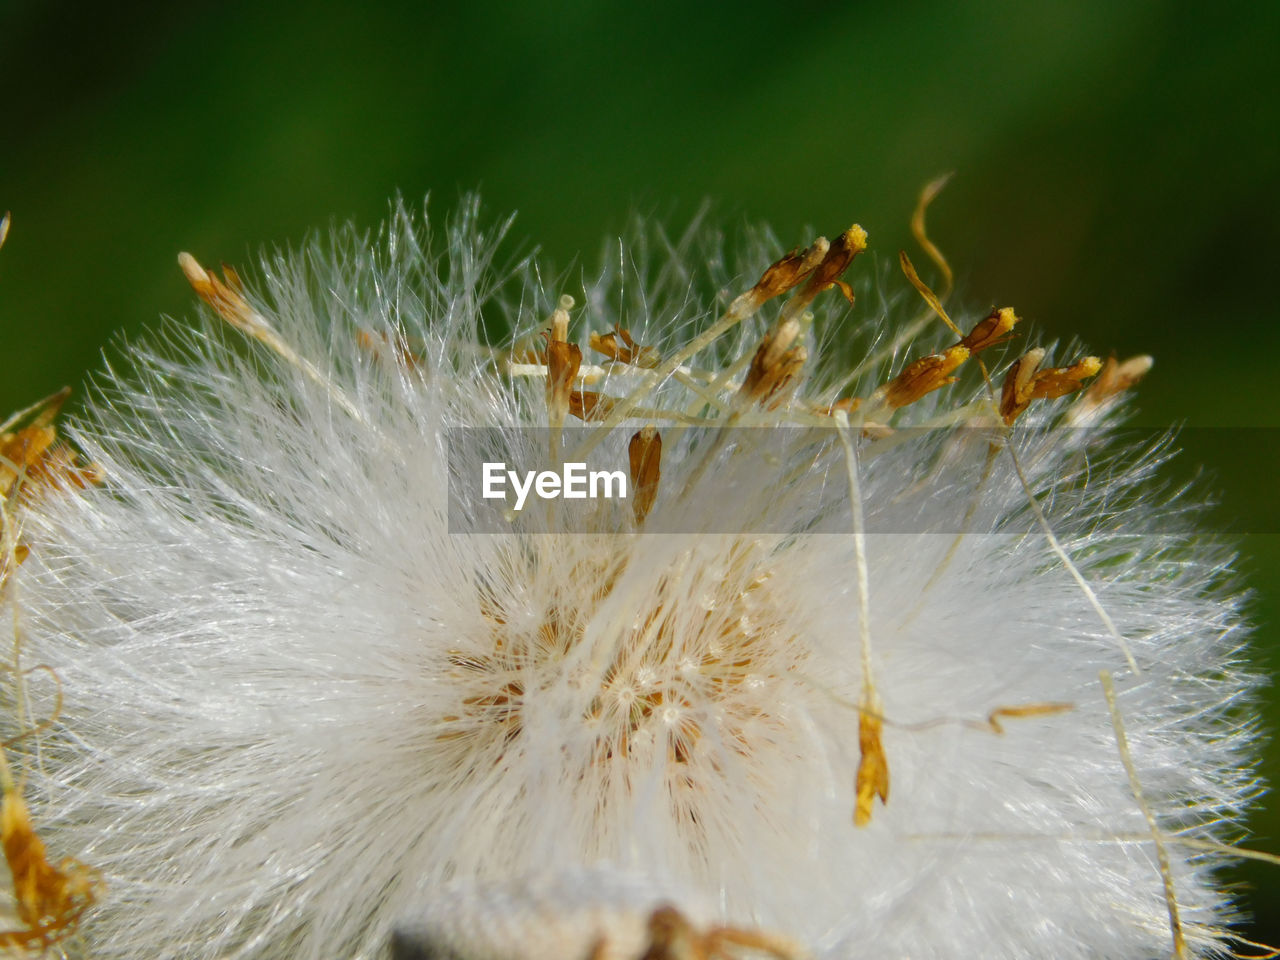 CLOSE-UP OF DANDELION ON WHITE FLOWERING PLANT